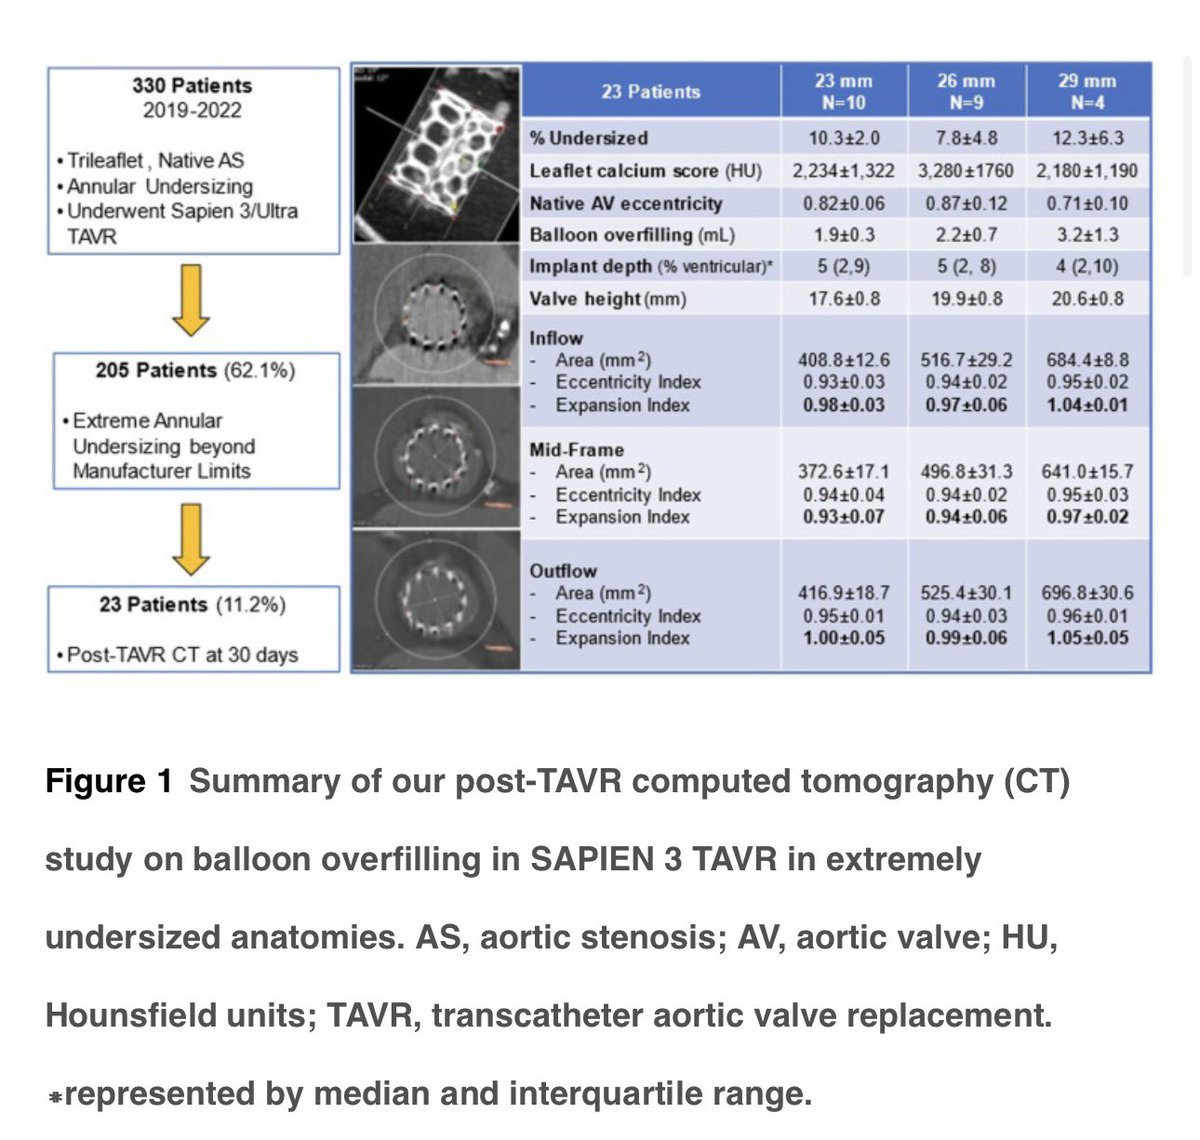 JUST OUT! Our @MyJSCAI @SCAI CT shows ++undersized S3 #TAVR ⬆️expansion to nominal. Better redo TAV feasibility too. Time to rethink S3 sizing chart? @Edwards_TAVR jscai.org/article/S2772-… @amrabbasmd @bapat_savrtavr @OKhaliqueMD @TheLADoctor @hahn_rt @modine_thomas @djc795